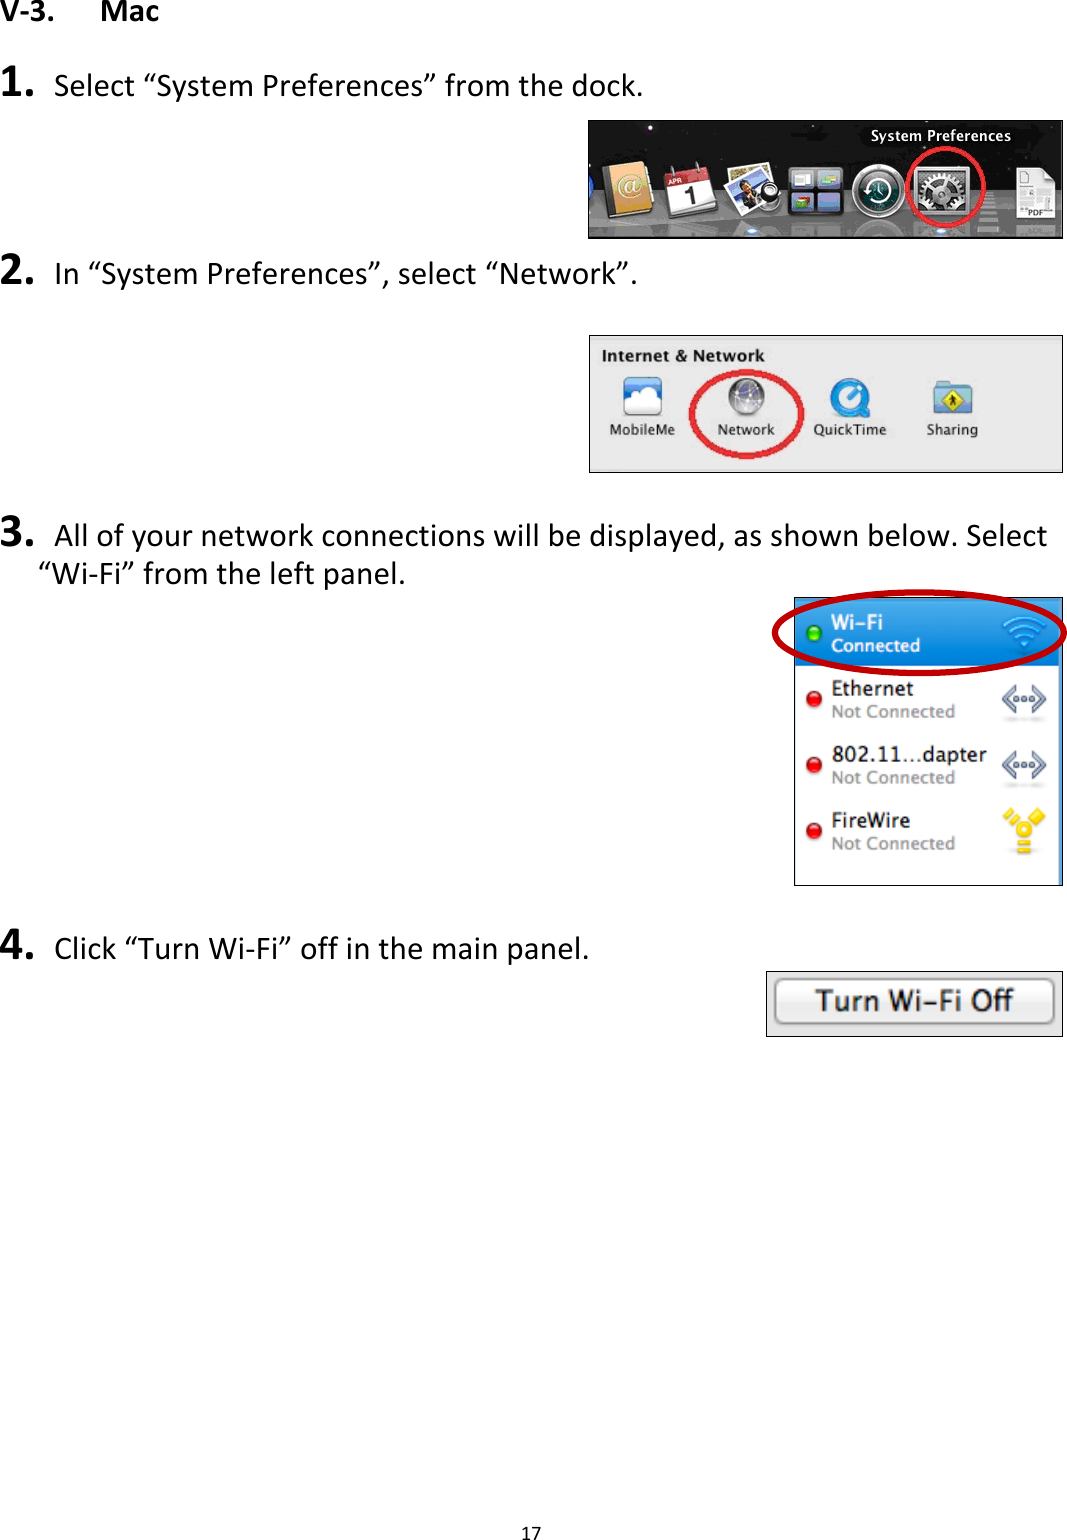 17  V-3.  Mac  1.  Select “System Preferences” from the dock.  2.  In “System Preferences”, select “Network”.    3.  All of your network connections will be displayed, as shown below. Select “Wi-Fi” from the left panel.   4.  Click “Turn Wi-Fi” off in the main panel.      